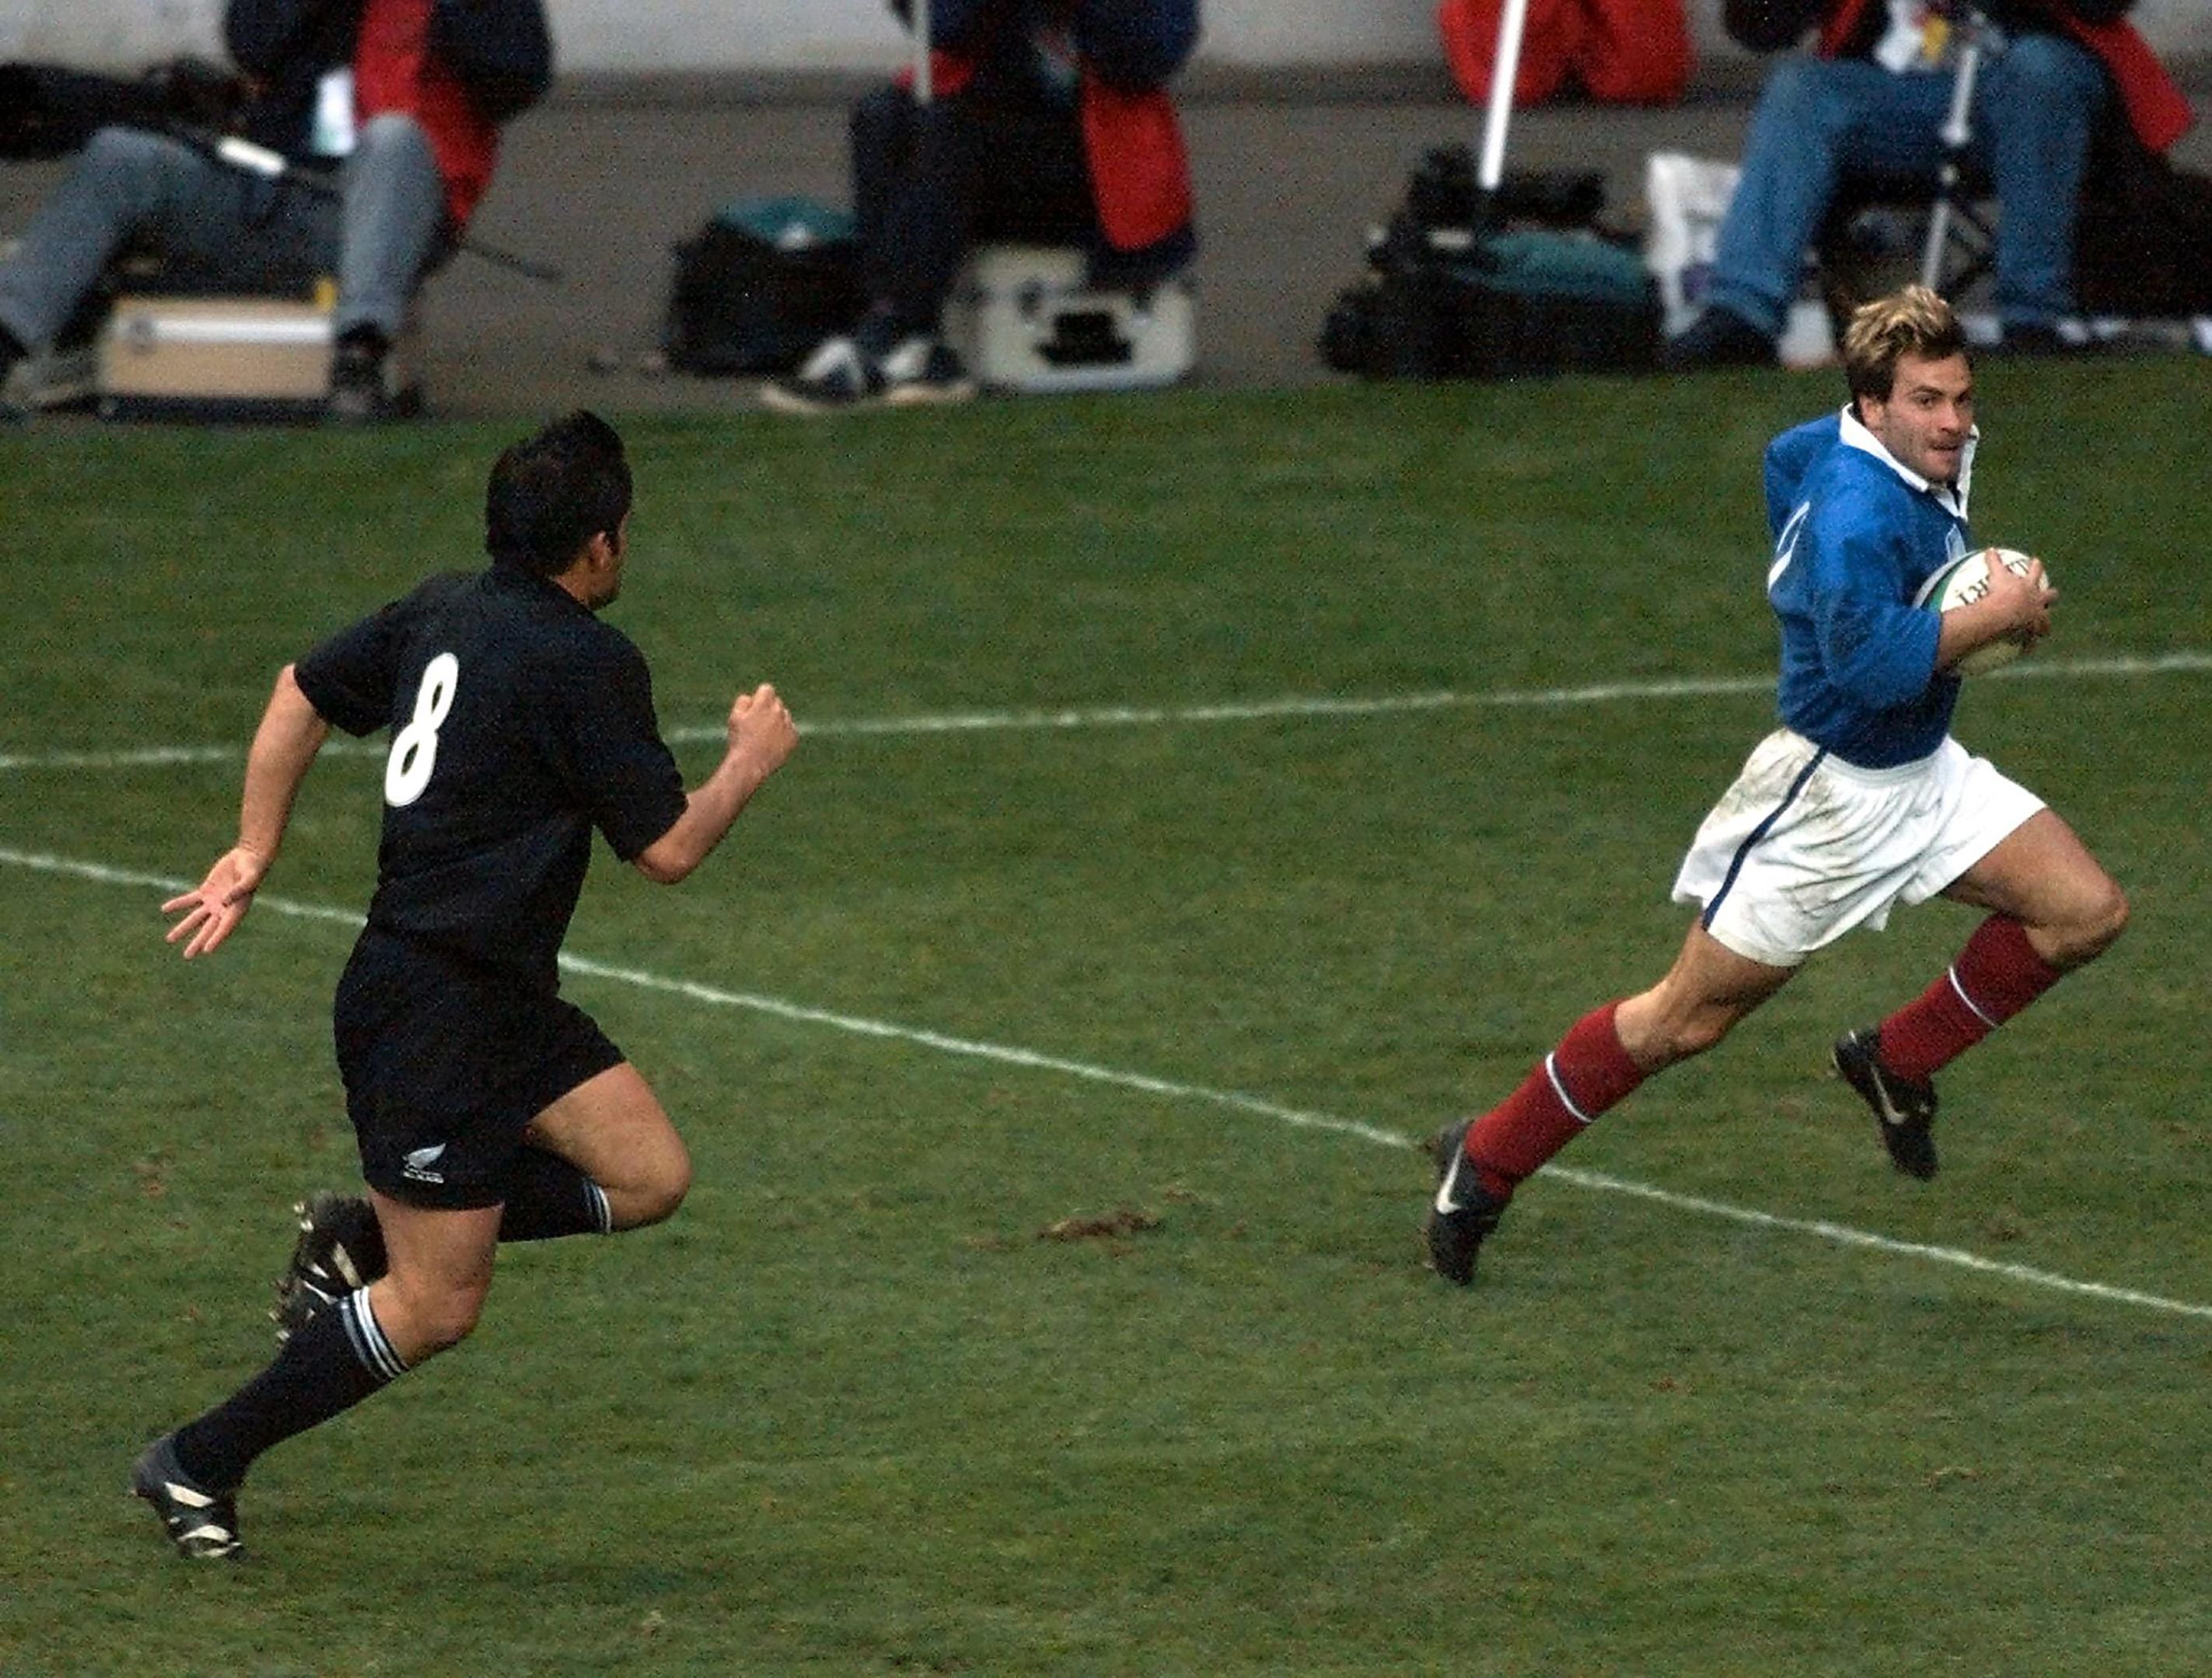 Dominci scored a try in France’s famous 1999 World Cup victory over New Zealand